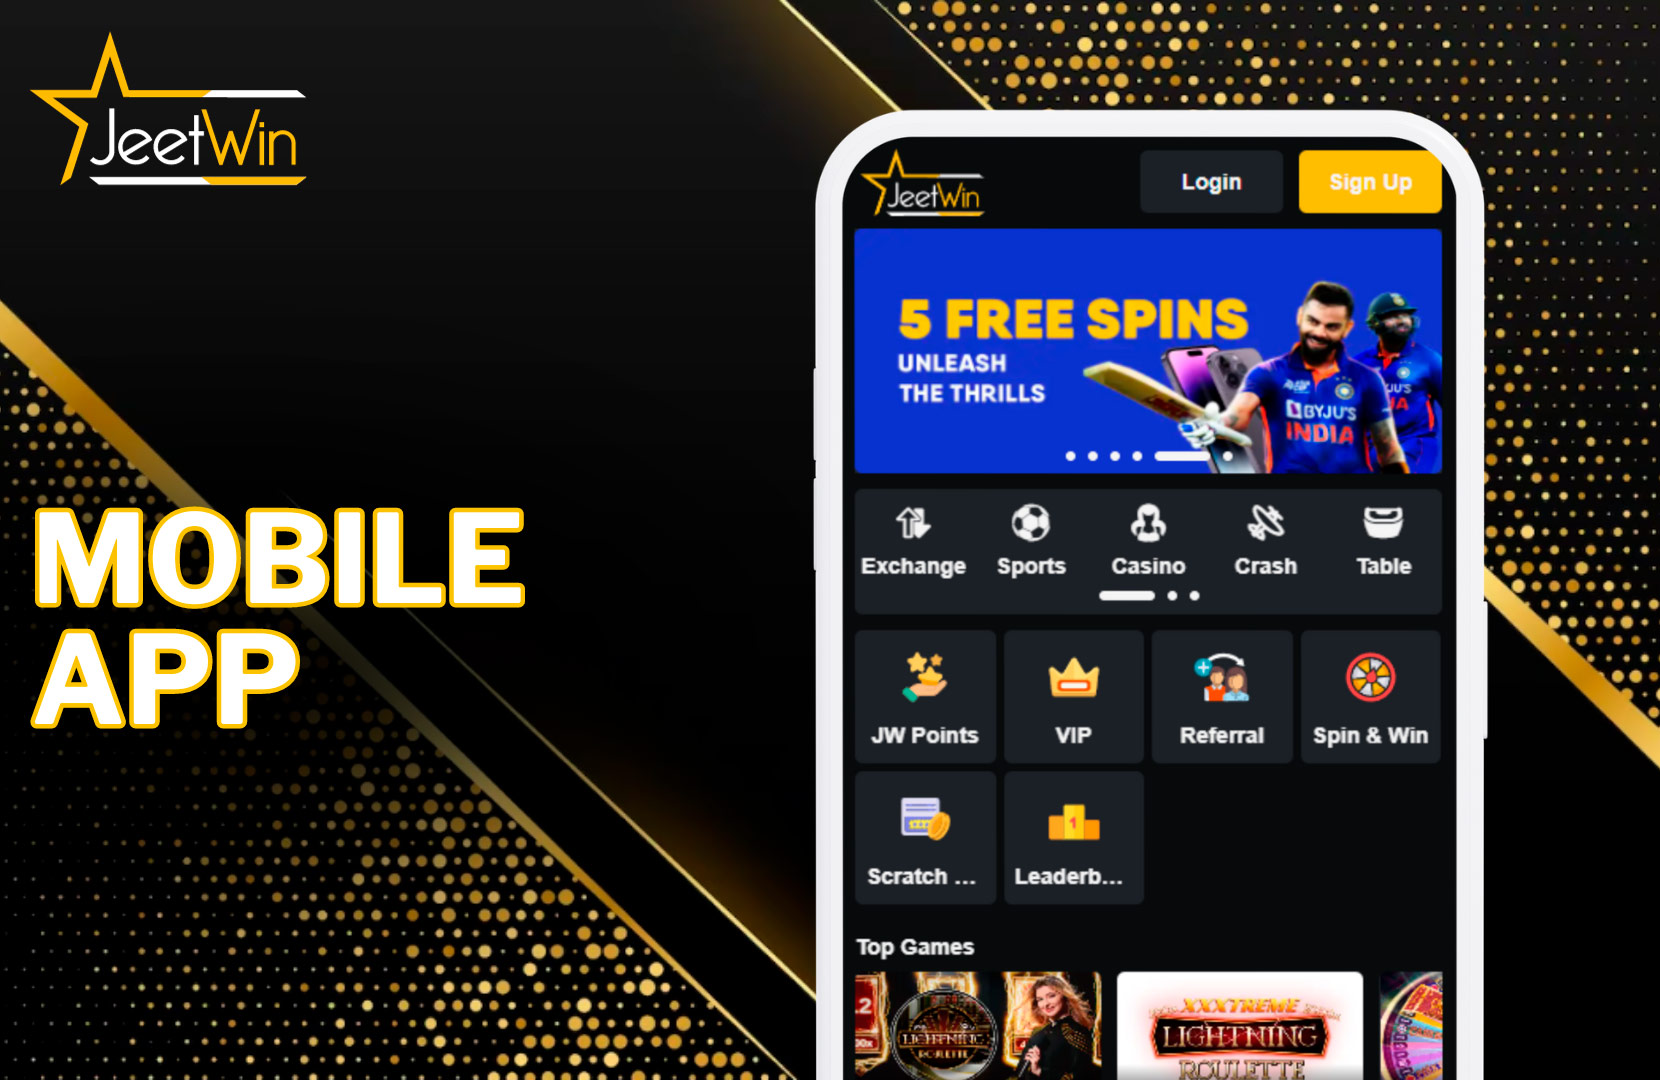 Experience the Thrill of Online Casino Gaming with Jeetwin Mobile App